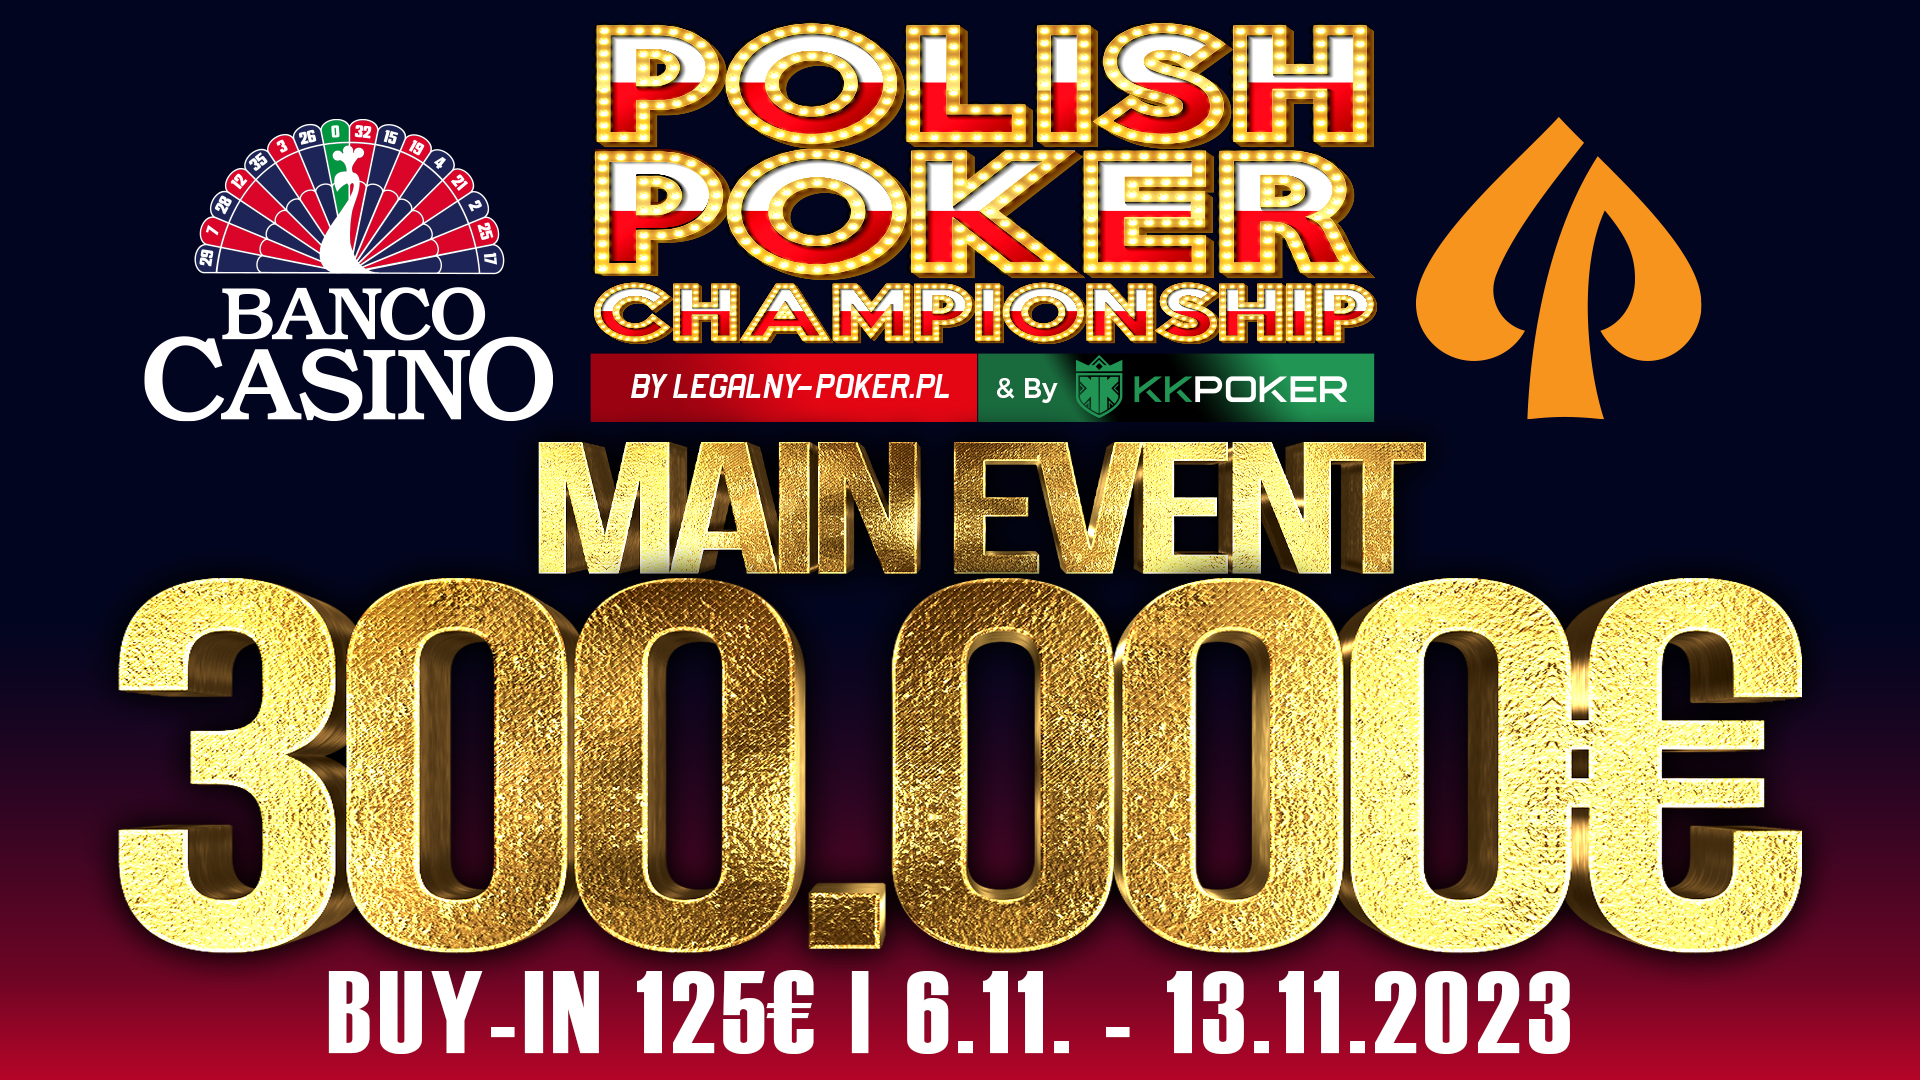 The Polish Championship and its Main Event 300,000€ GTD for only 125€ started on the opening day!